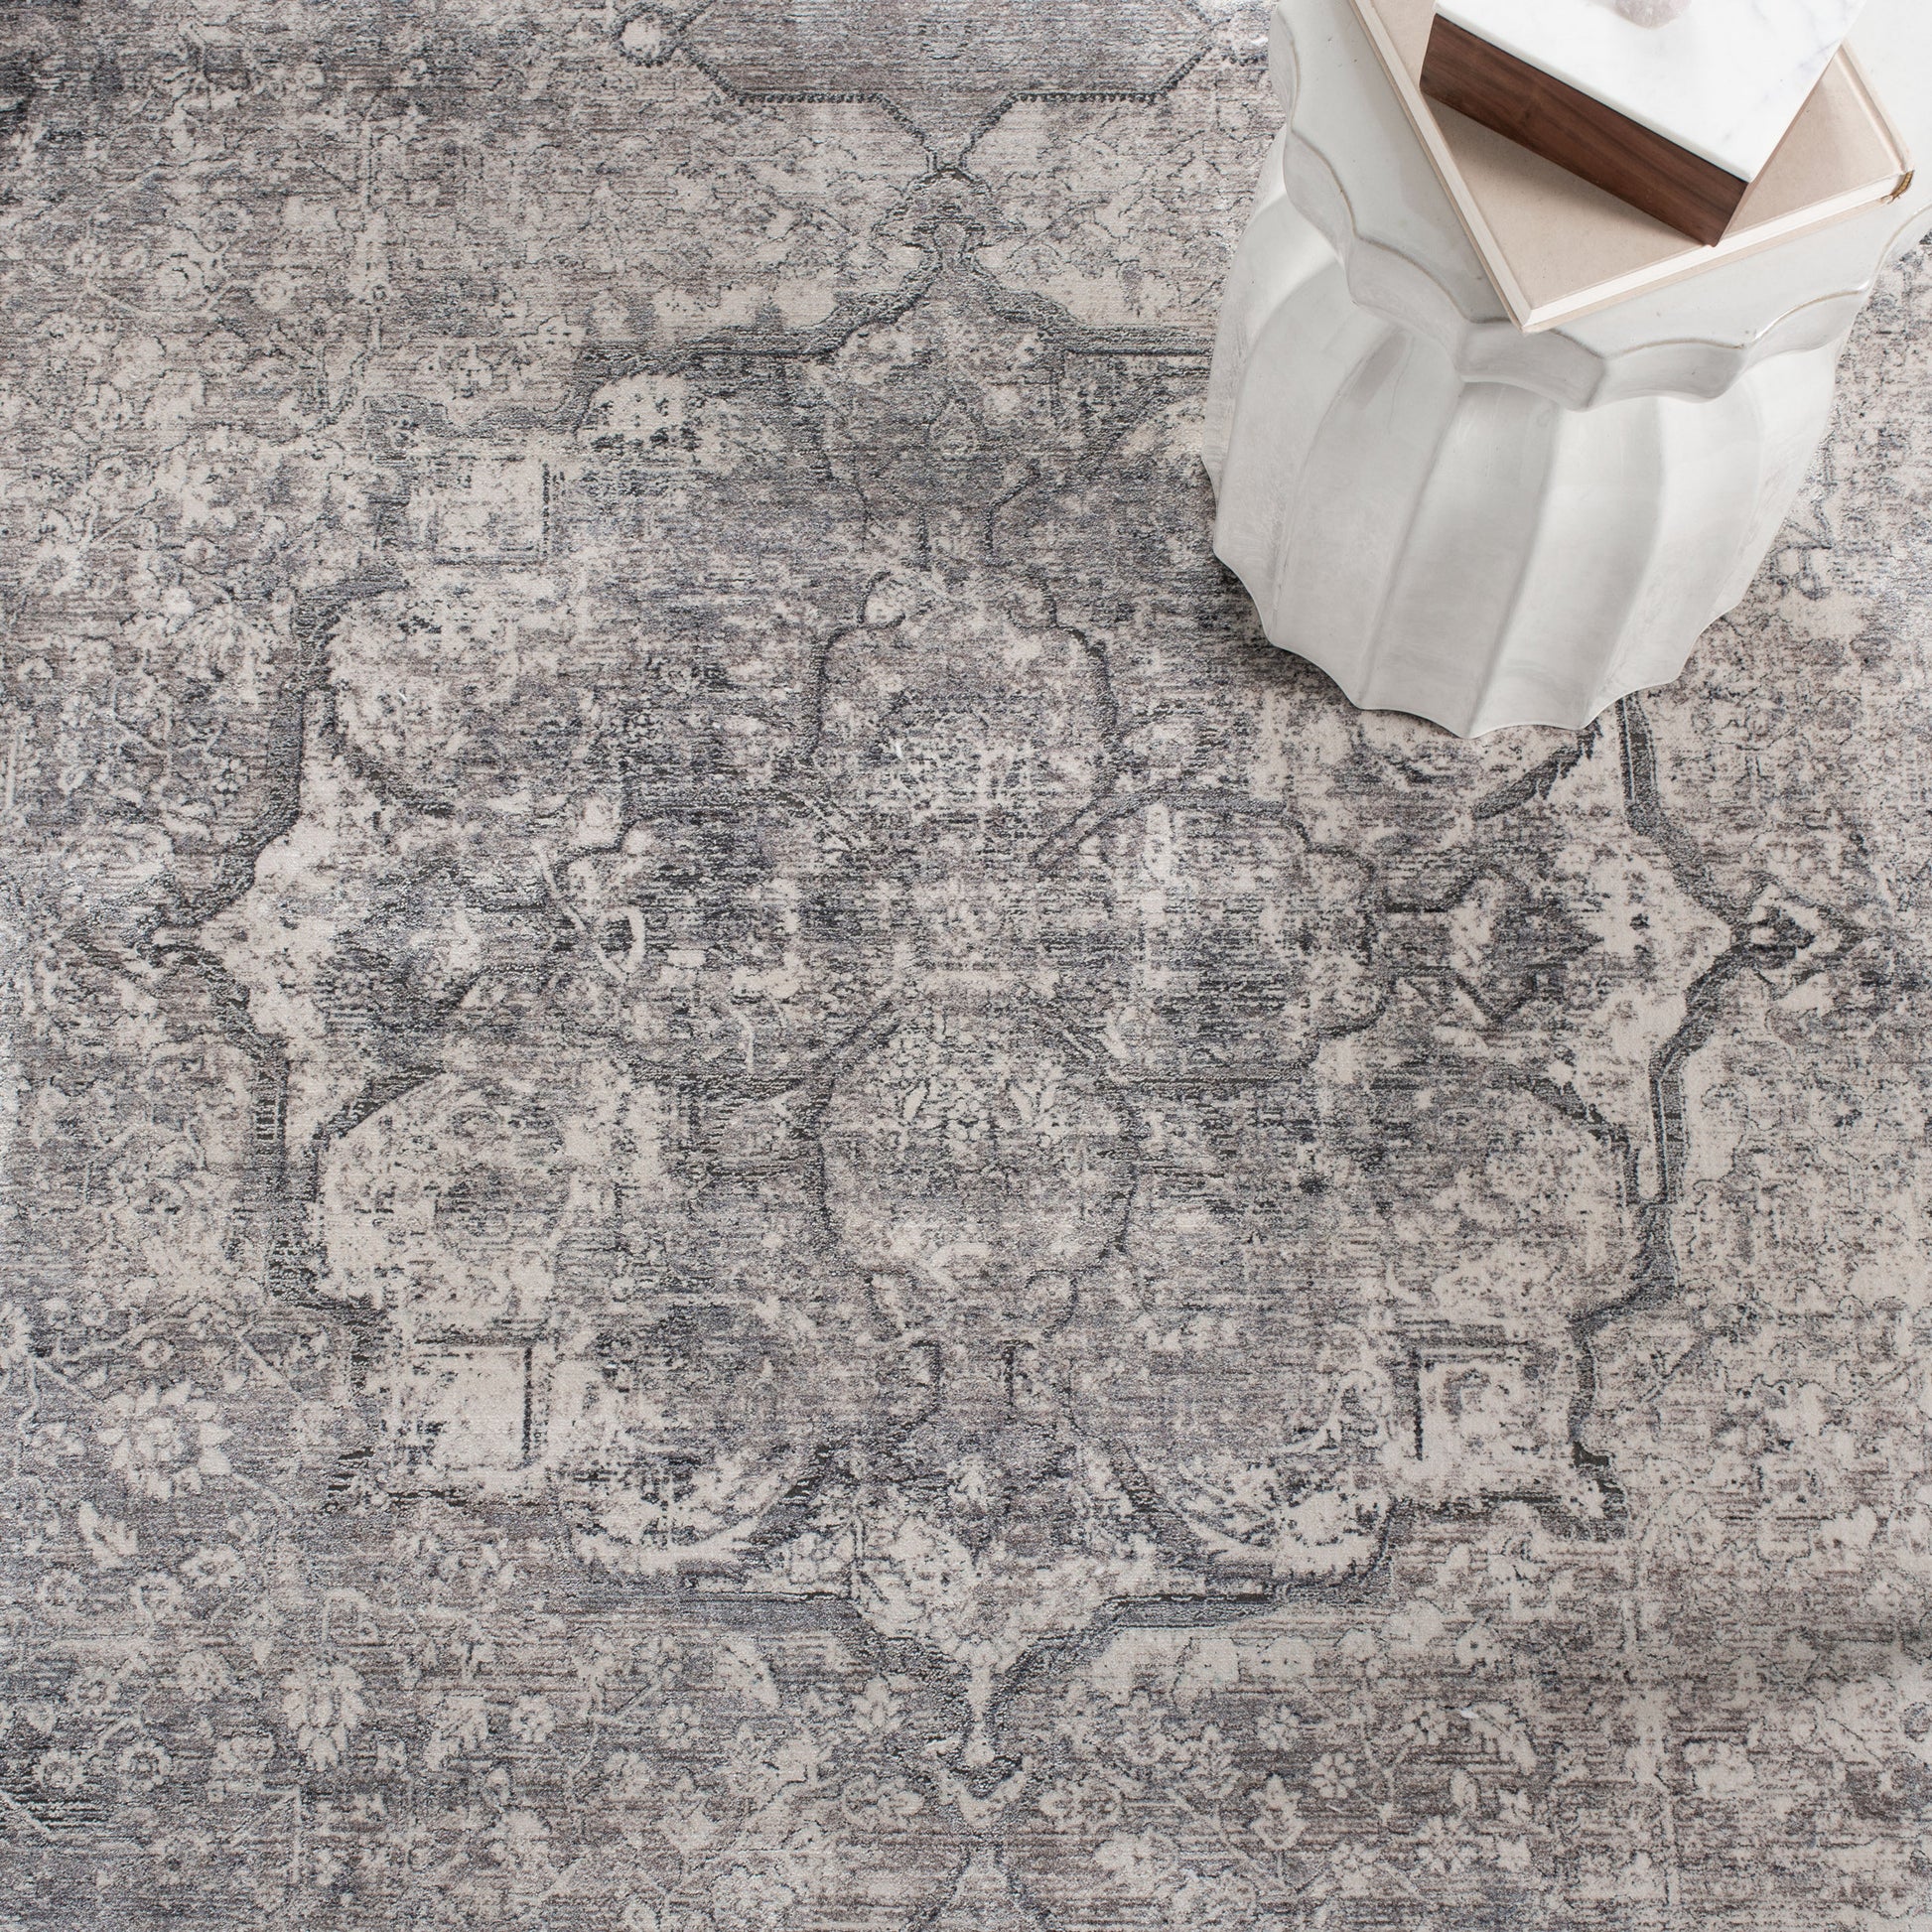 Safavieh Eclipse Ecl134A Ivory/Charcoal Area Rug